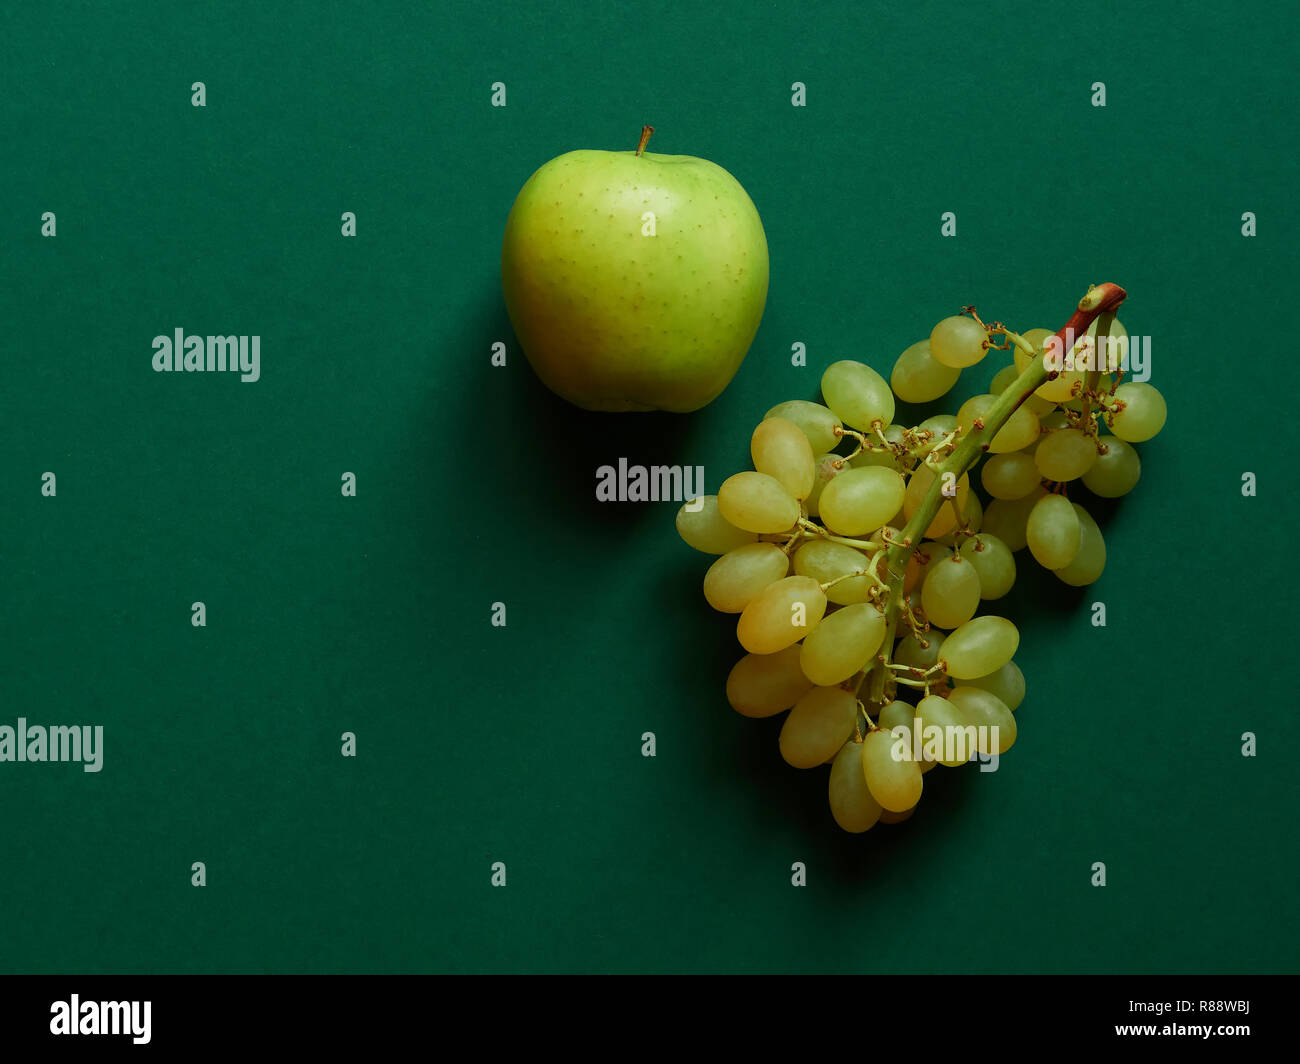 Green apple and bunch of green grapes isolated in studio with a green background viewed from above Stock Photo